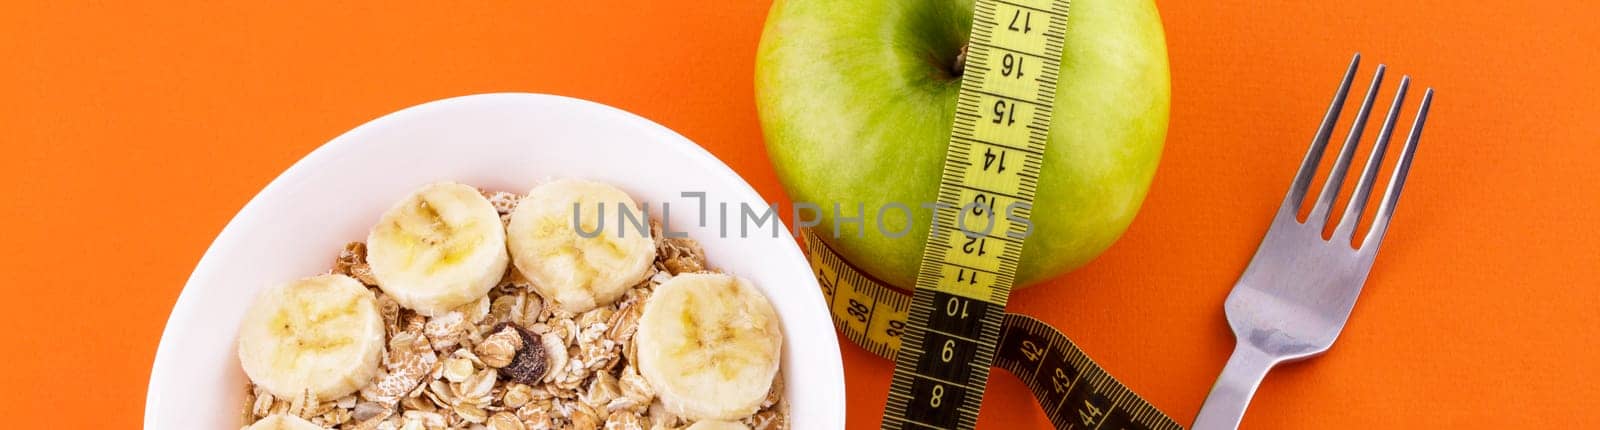 muesli with banana in a white plate on an orange background, a fork and a green apple with a yellow measuring tape. Healthy food and diet concept